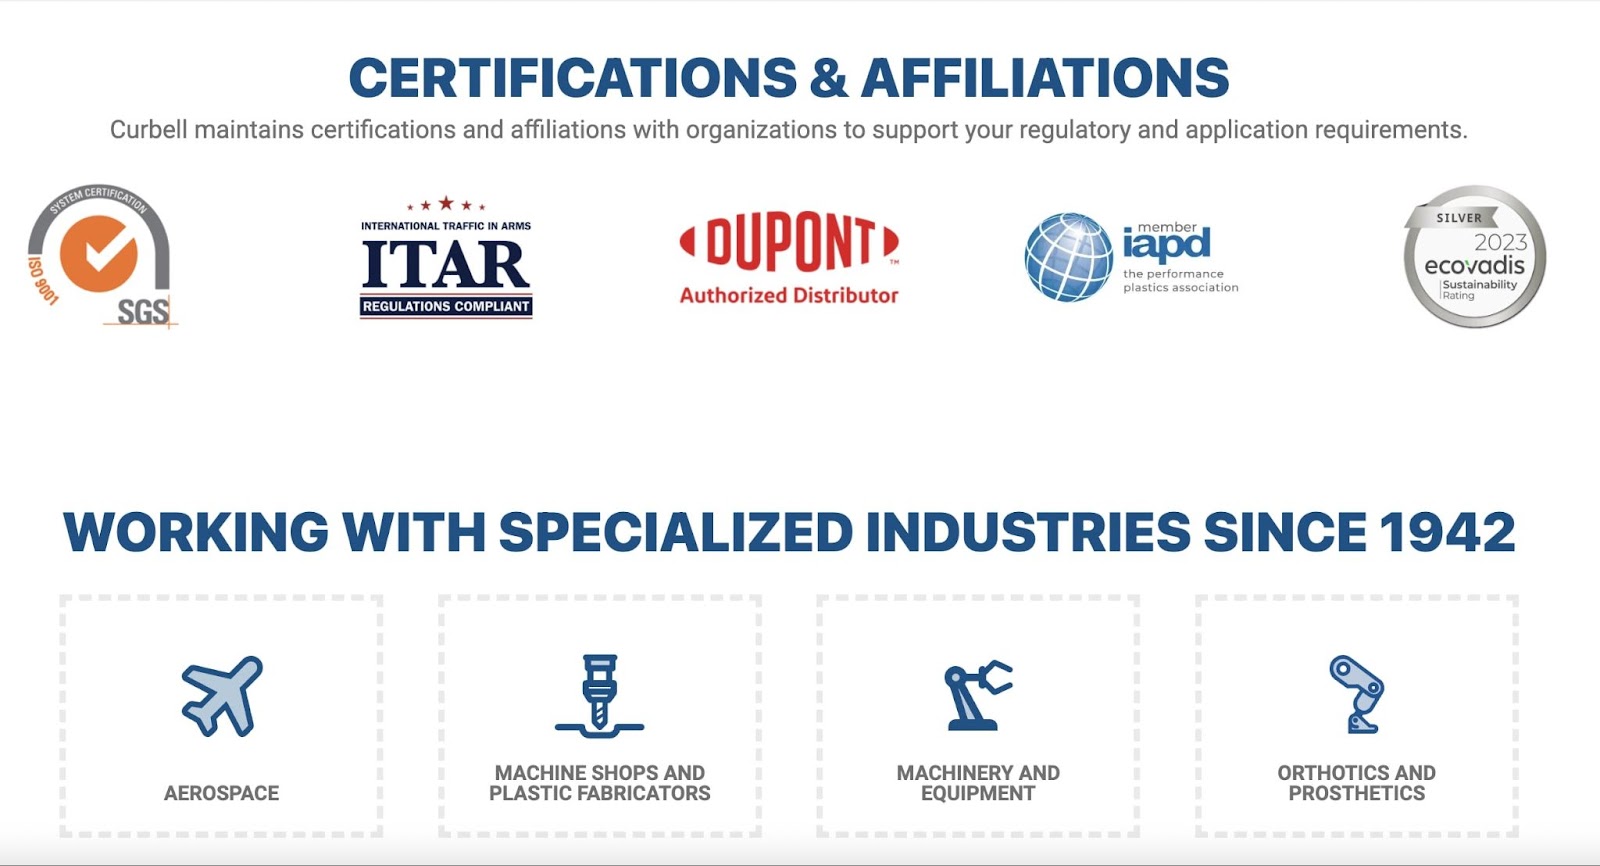 Certifications & affiliations on Curbell Plastics' homepage